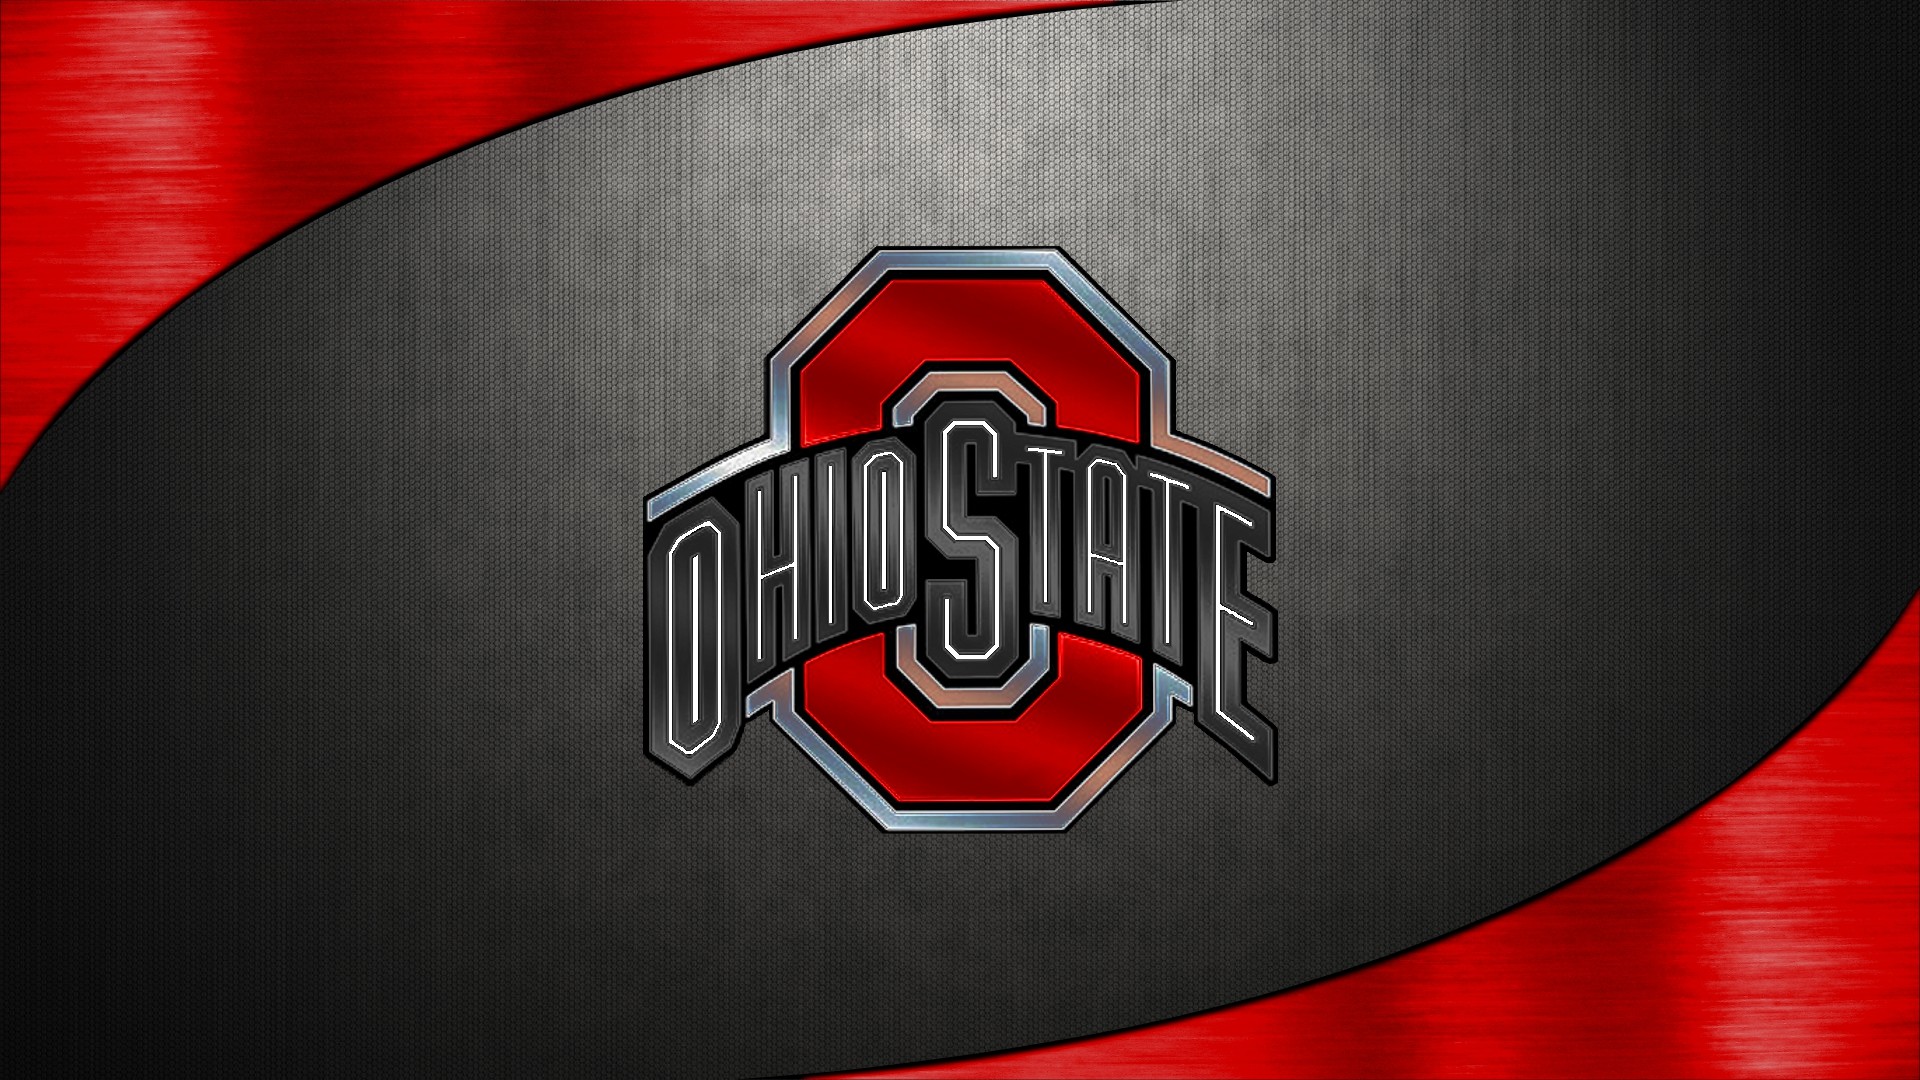 1920x1080 ... ohio state football osu desktop background hd wallpapers high  definition cool desktop wallpapers for windows apple